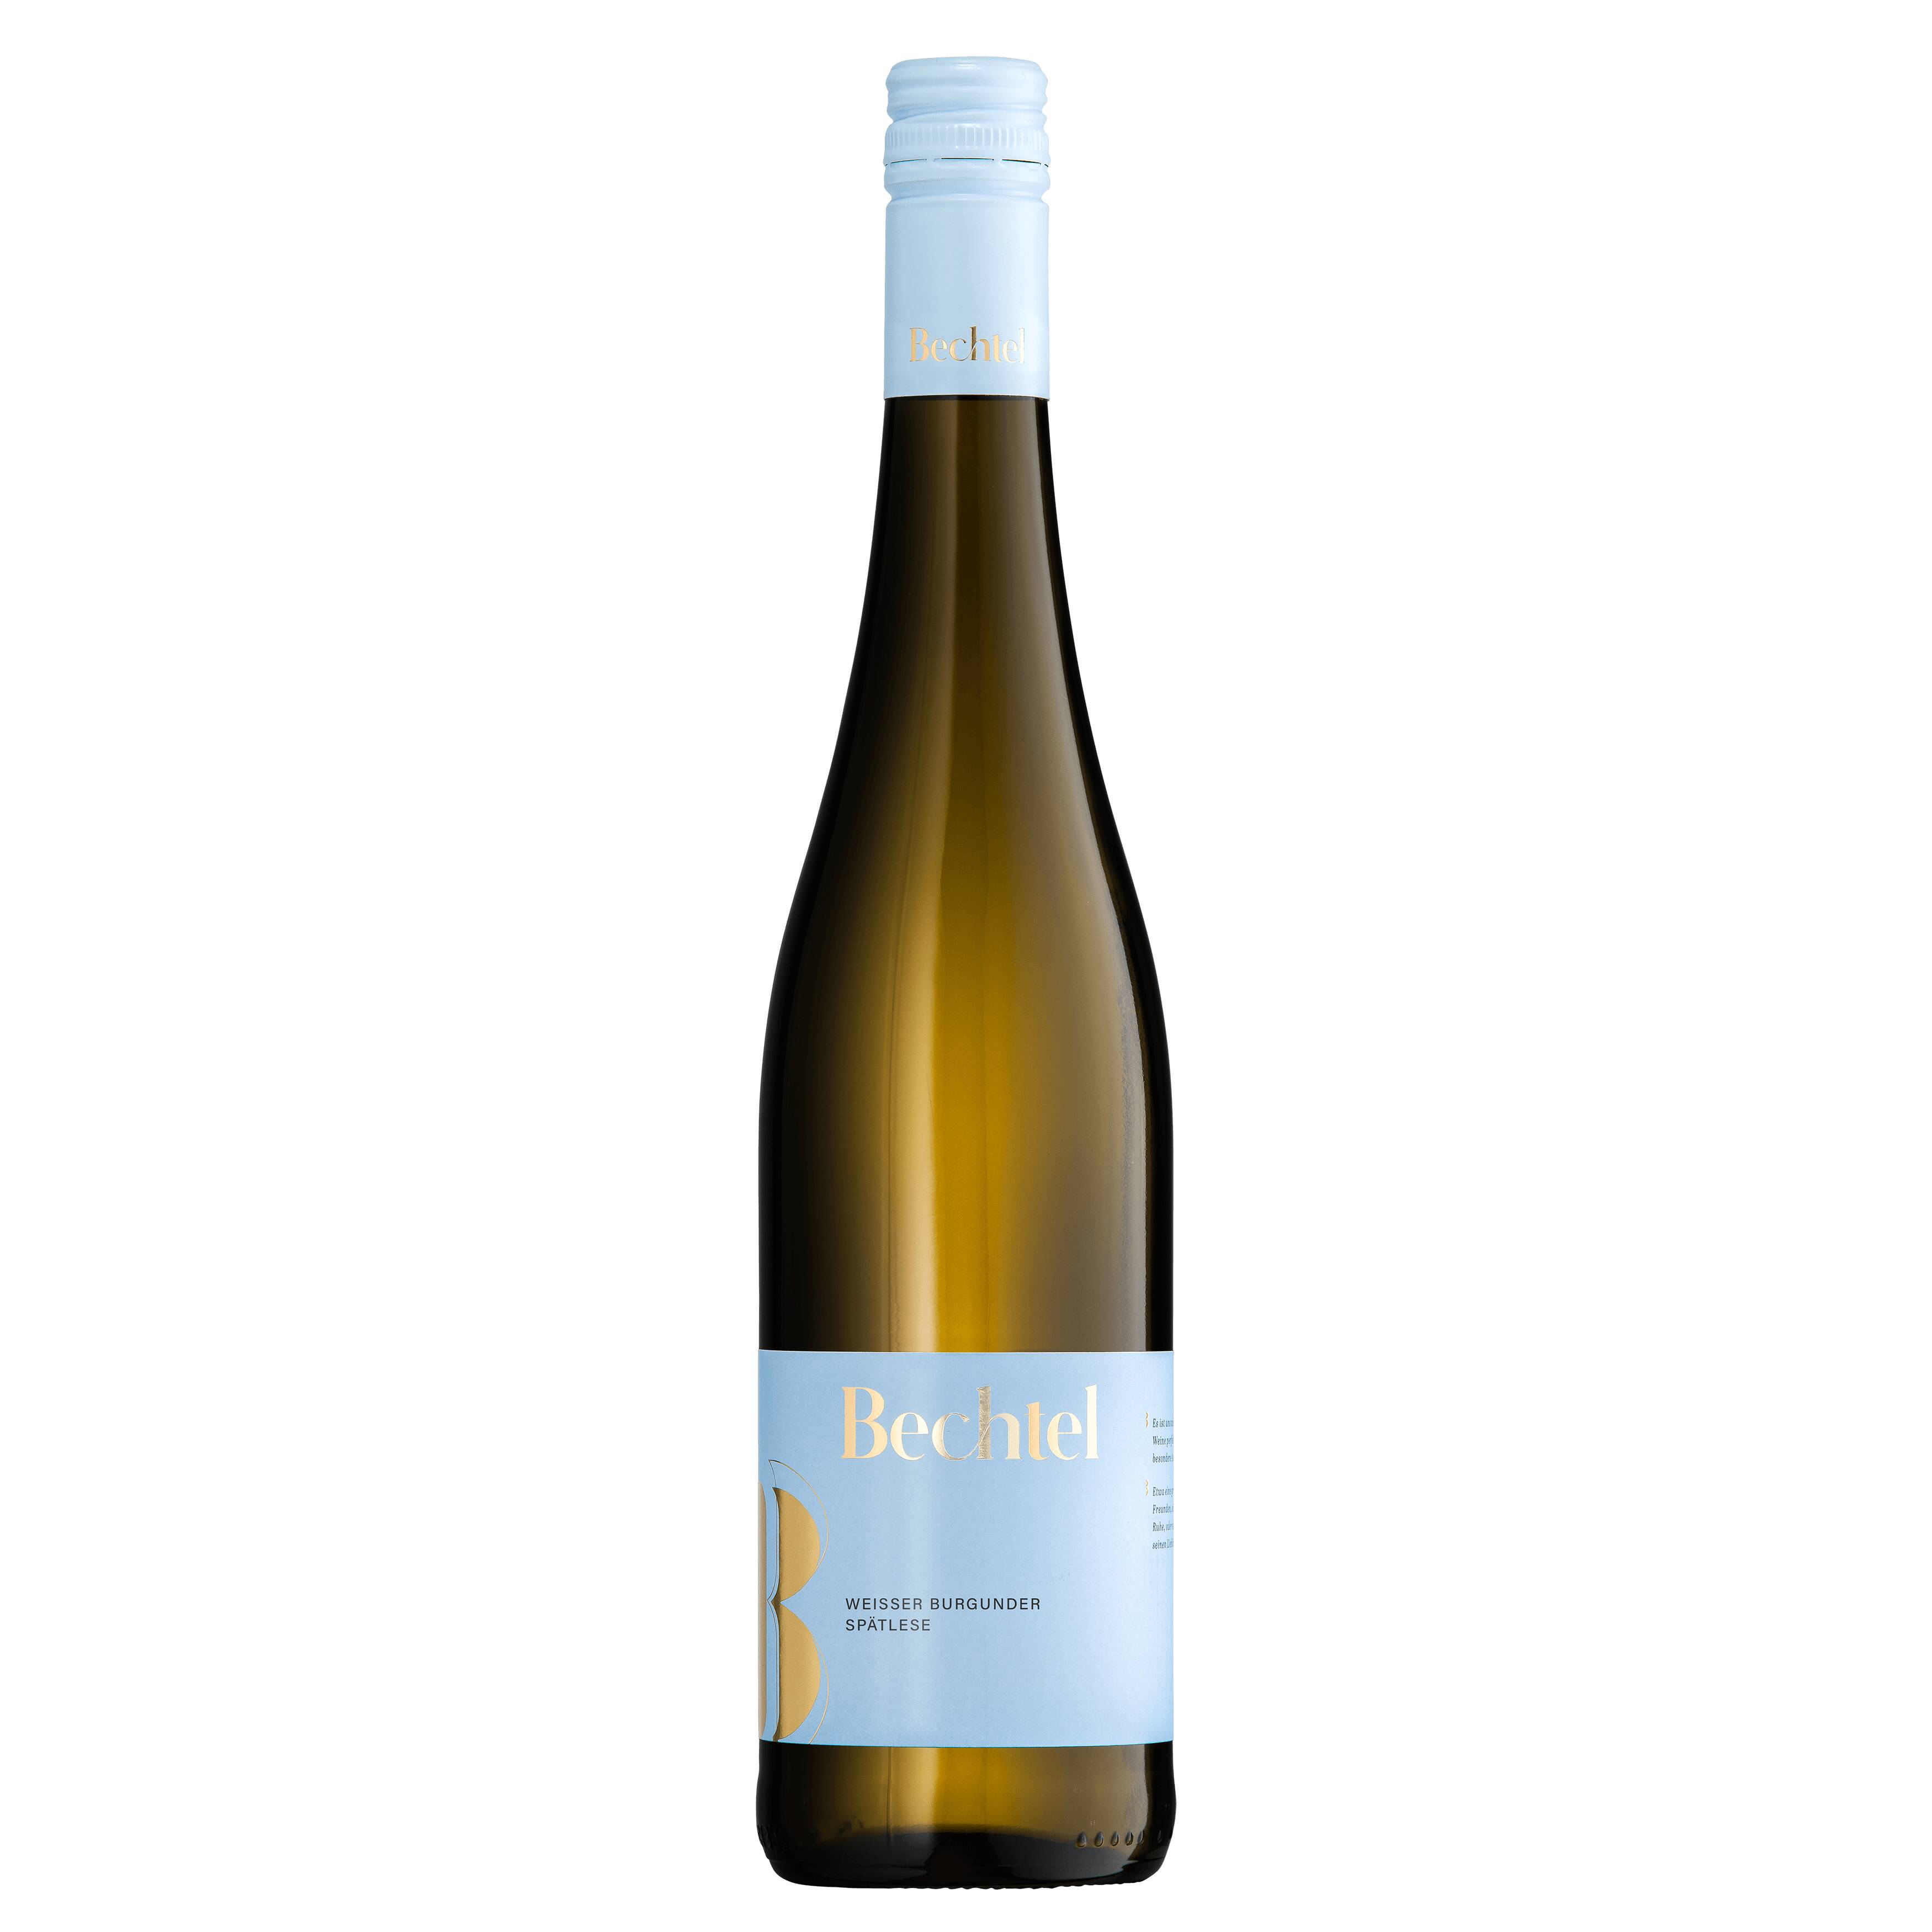 | Find+Buy: wein.plus The members wines Find+Buy our wein.plus of